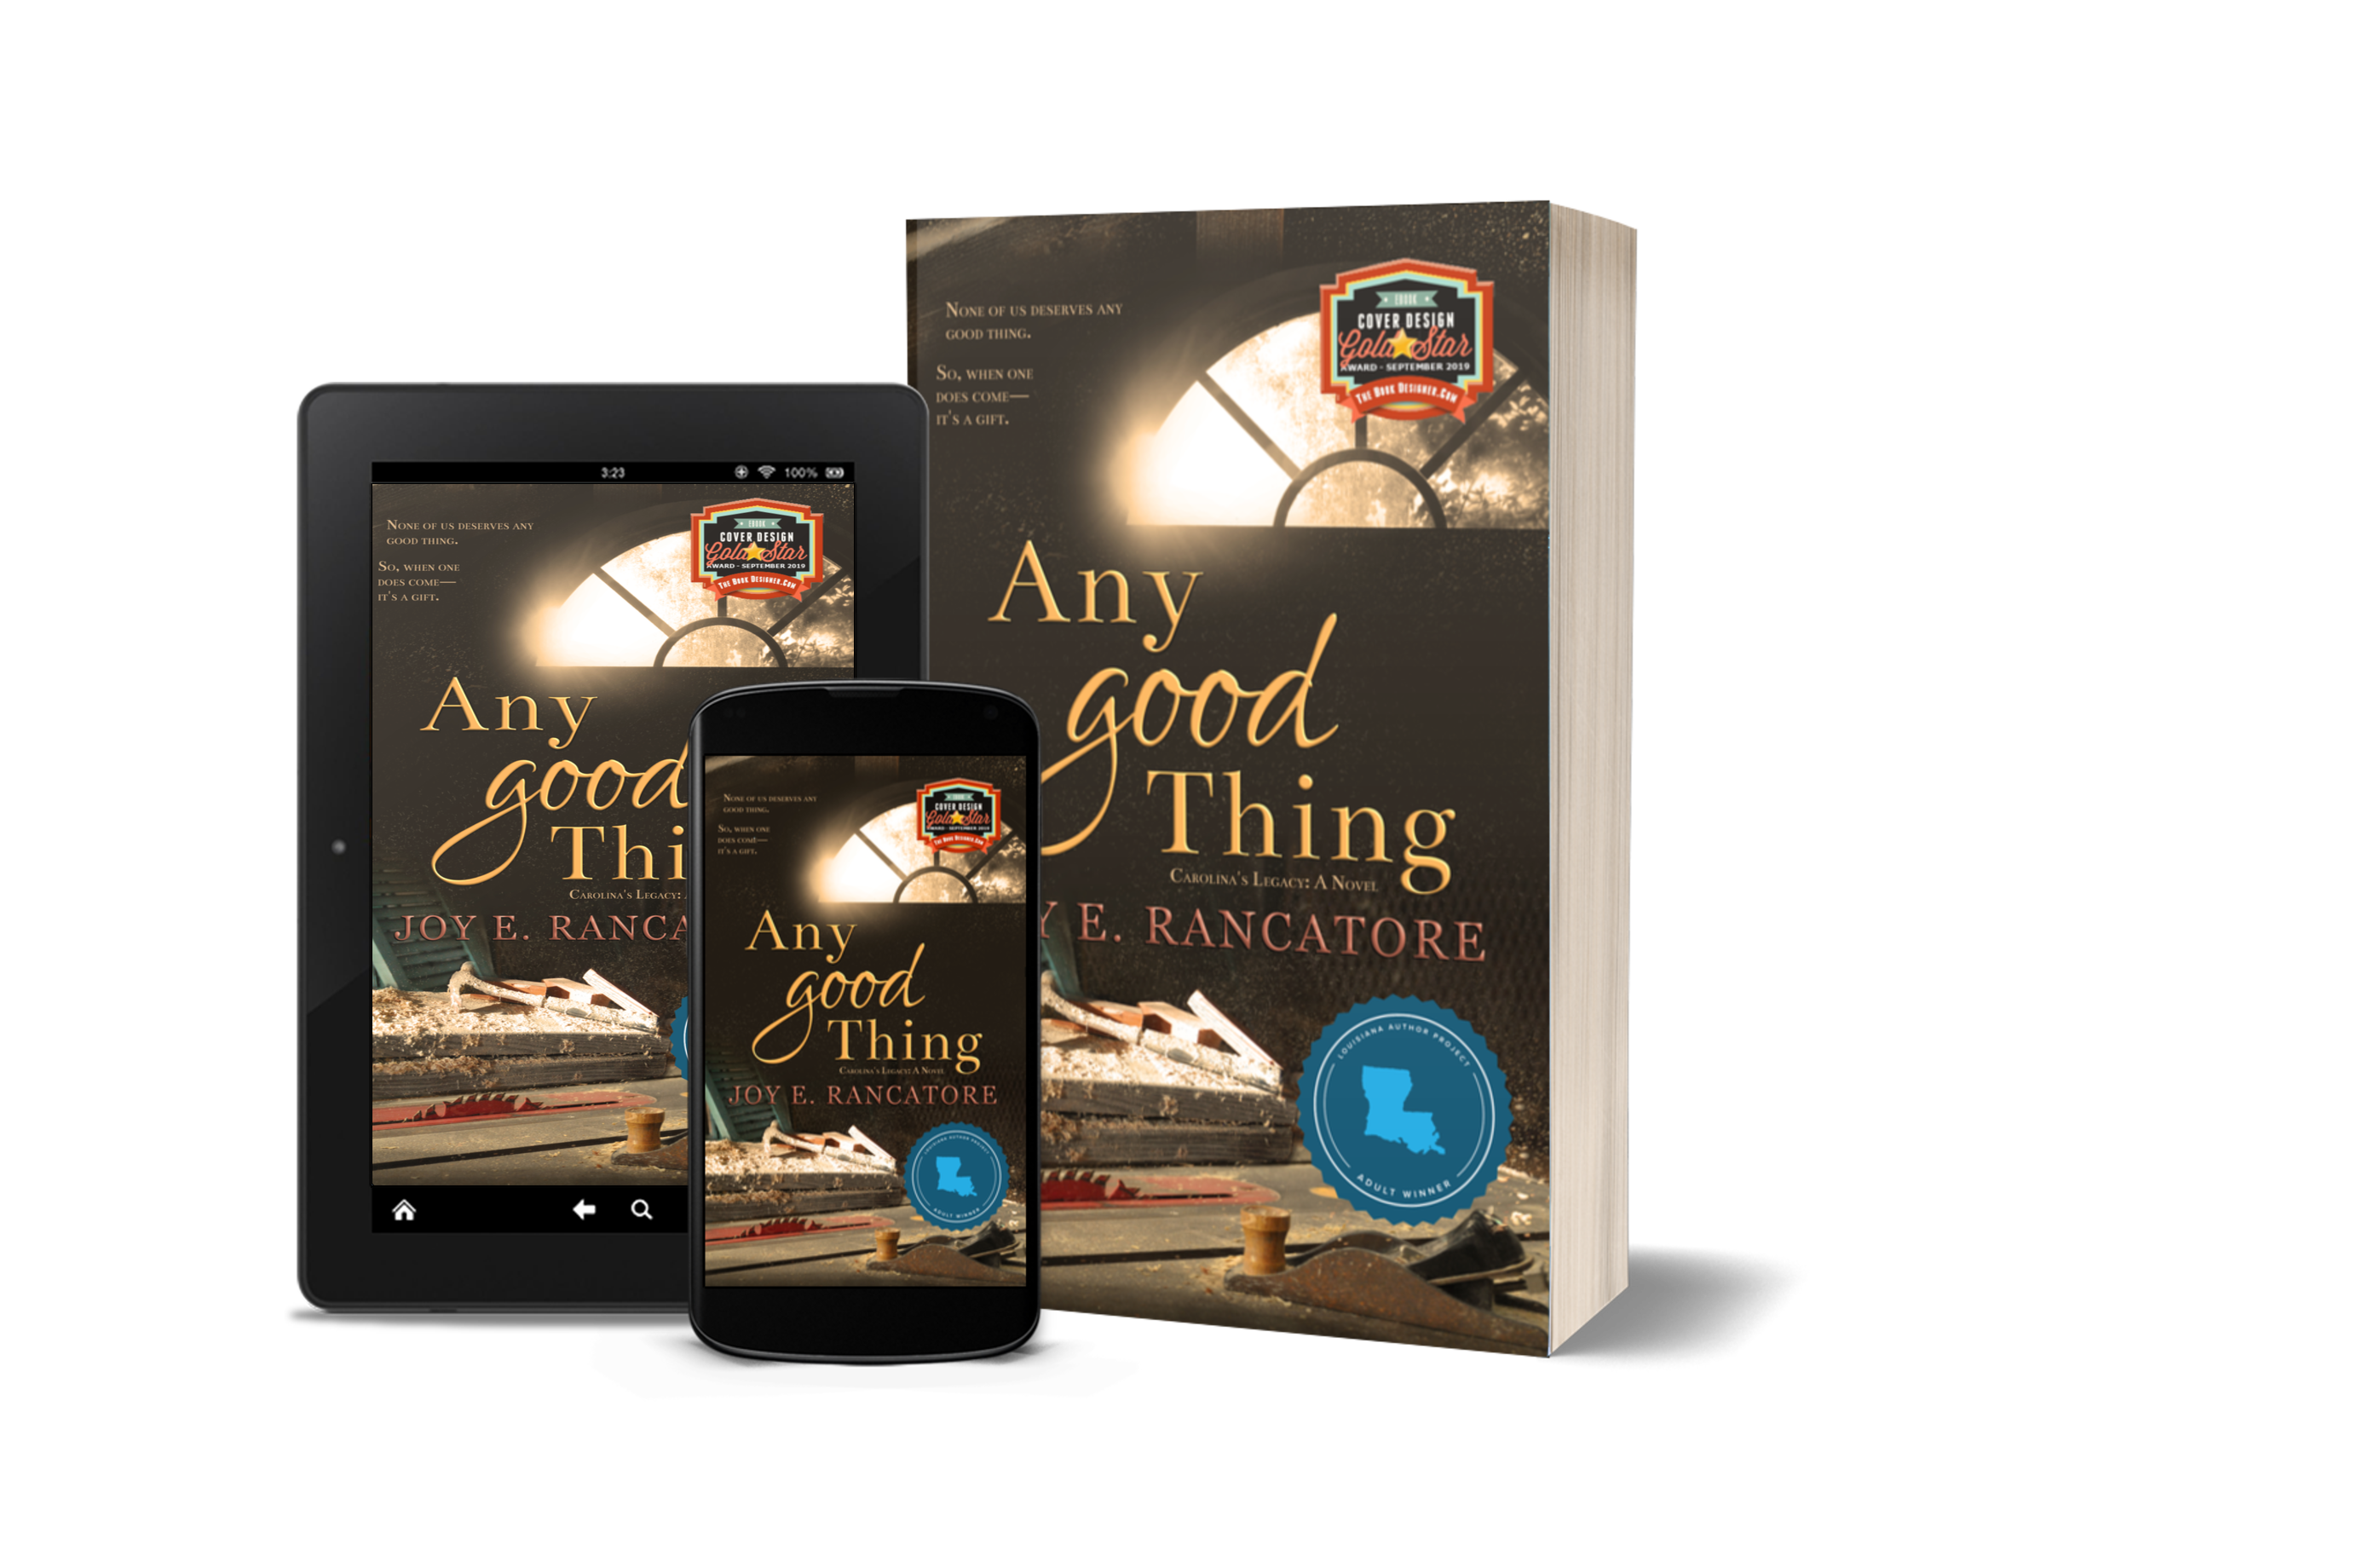 Any Good Thing by Joy E. Rancatore, Southern fiction with Christian roots